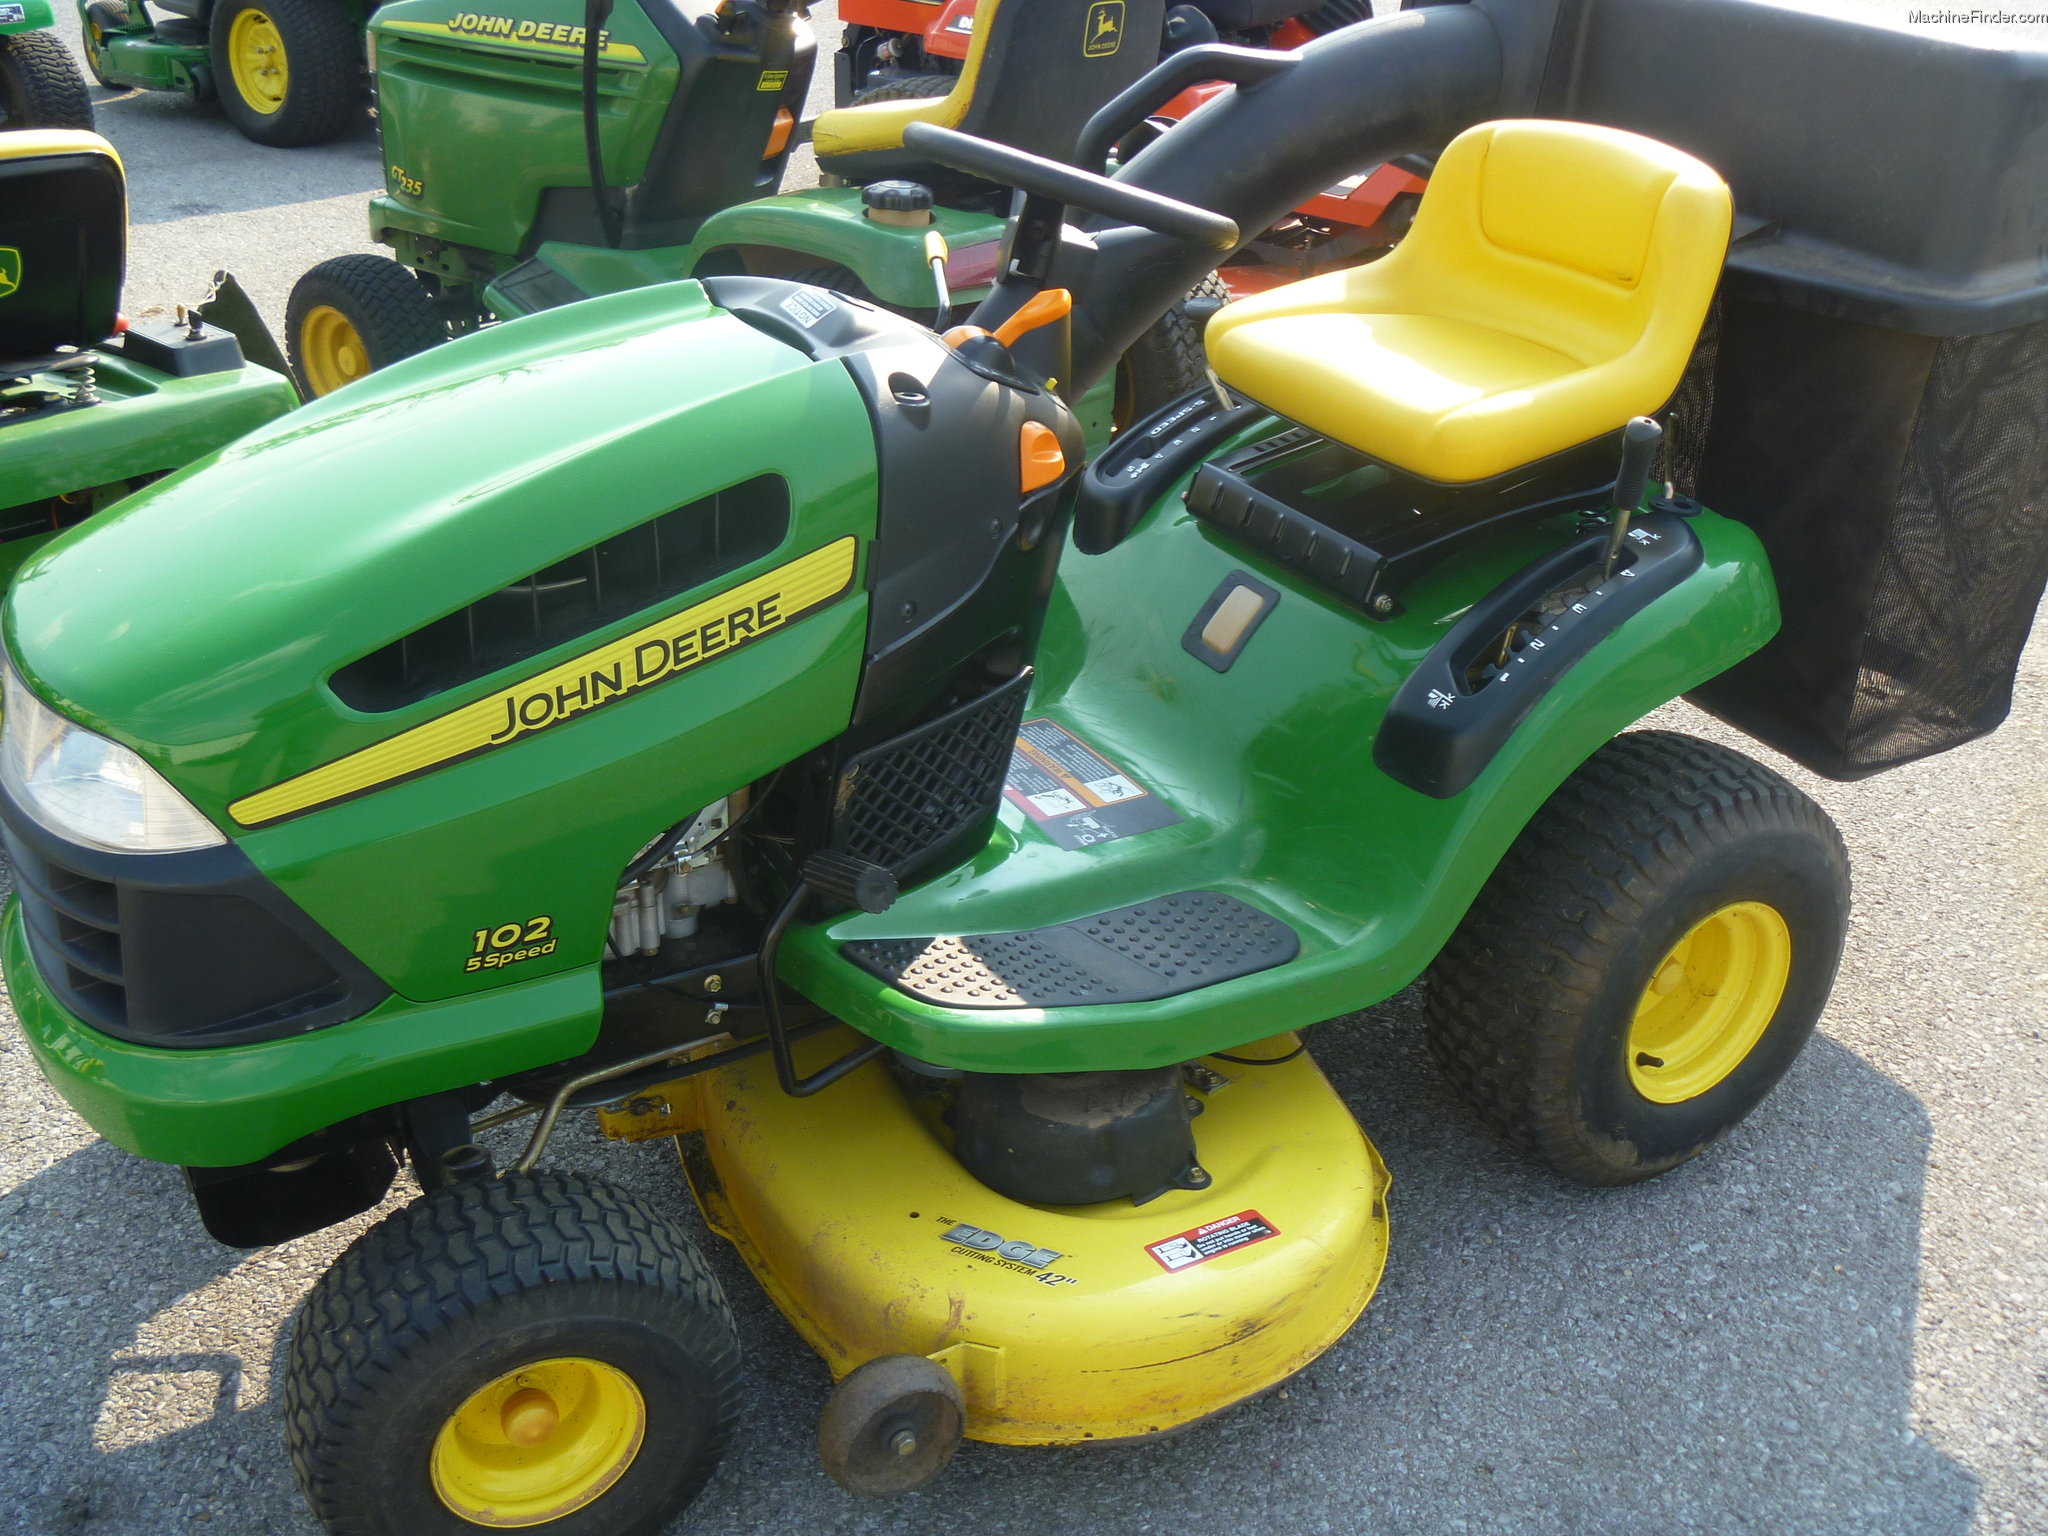 John Deere 102 - specs, photos, videos and more on ...